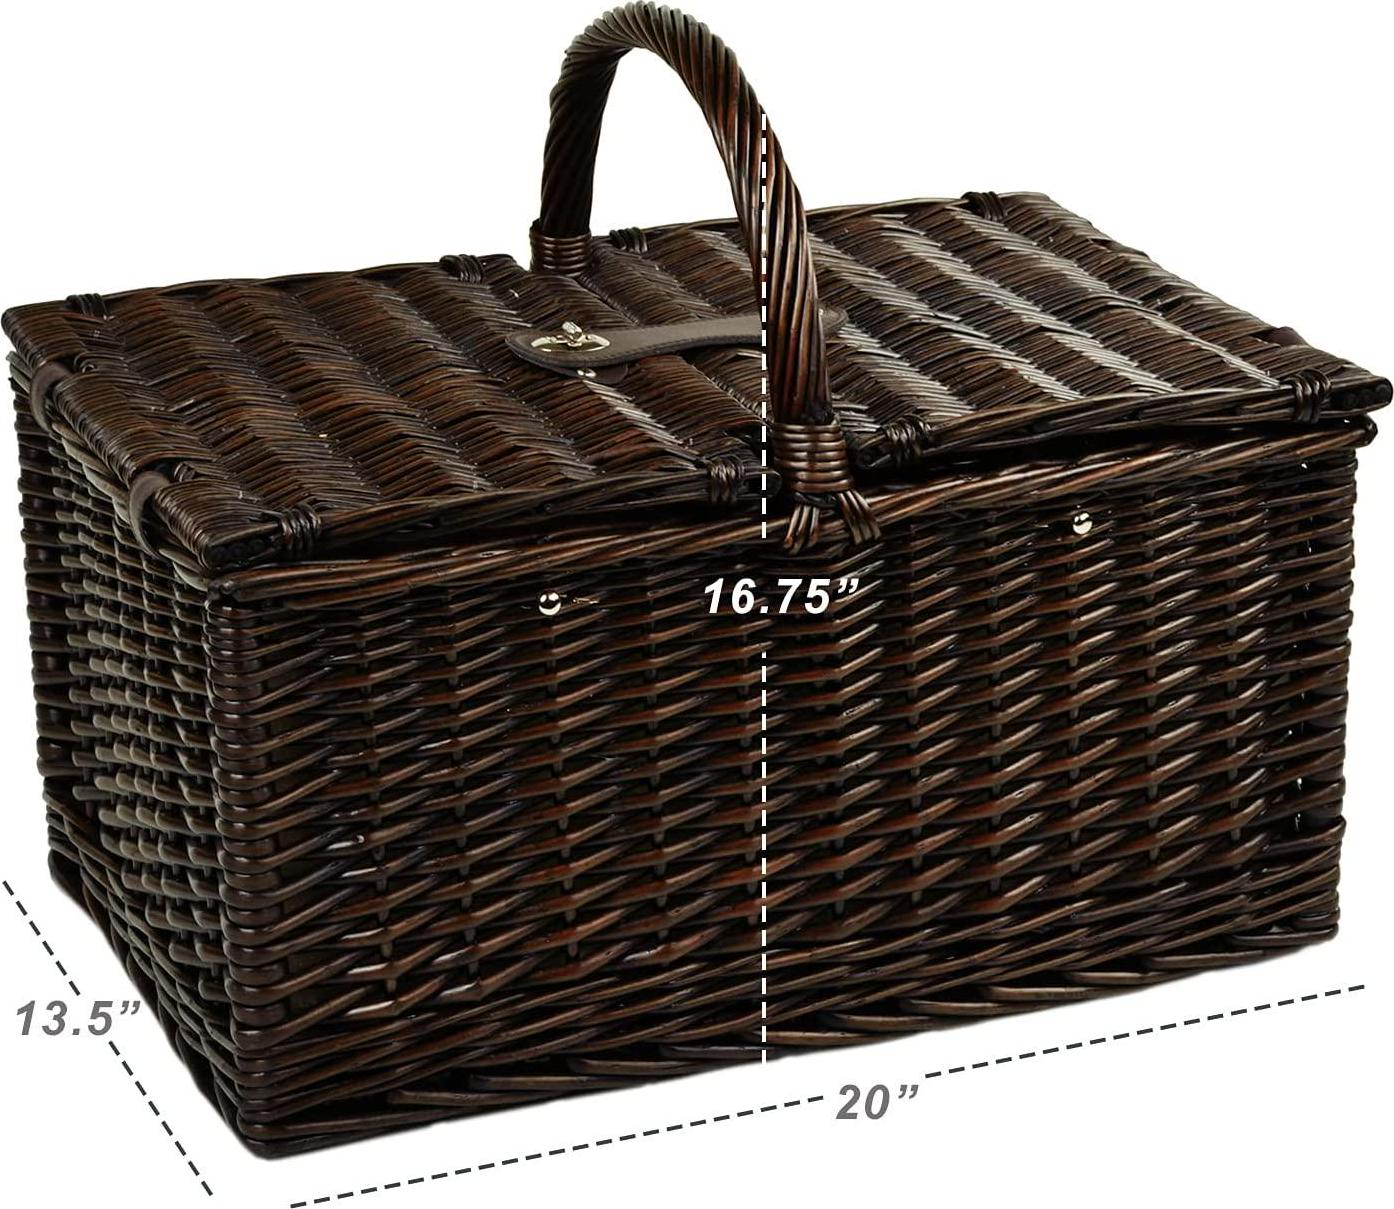 Picnic at Ascot Buckingham Willow Picnic Basket with Service for 4 with Blanket- London Plaid